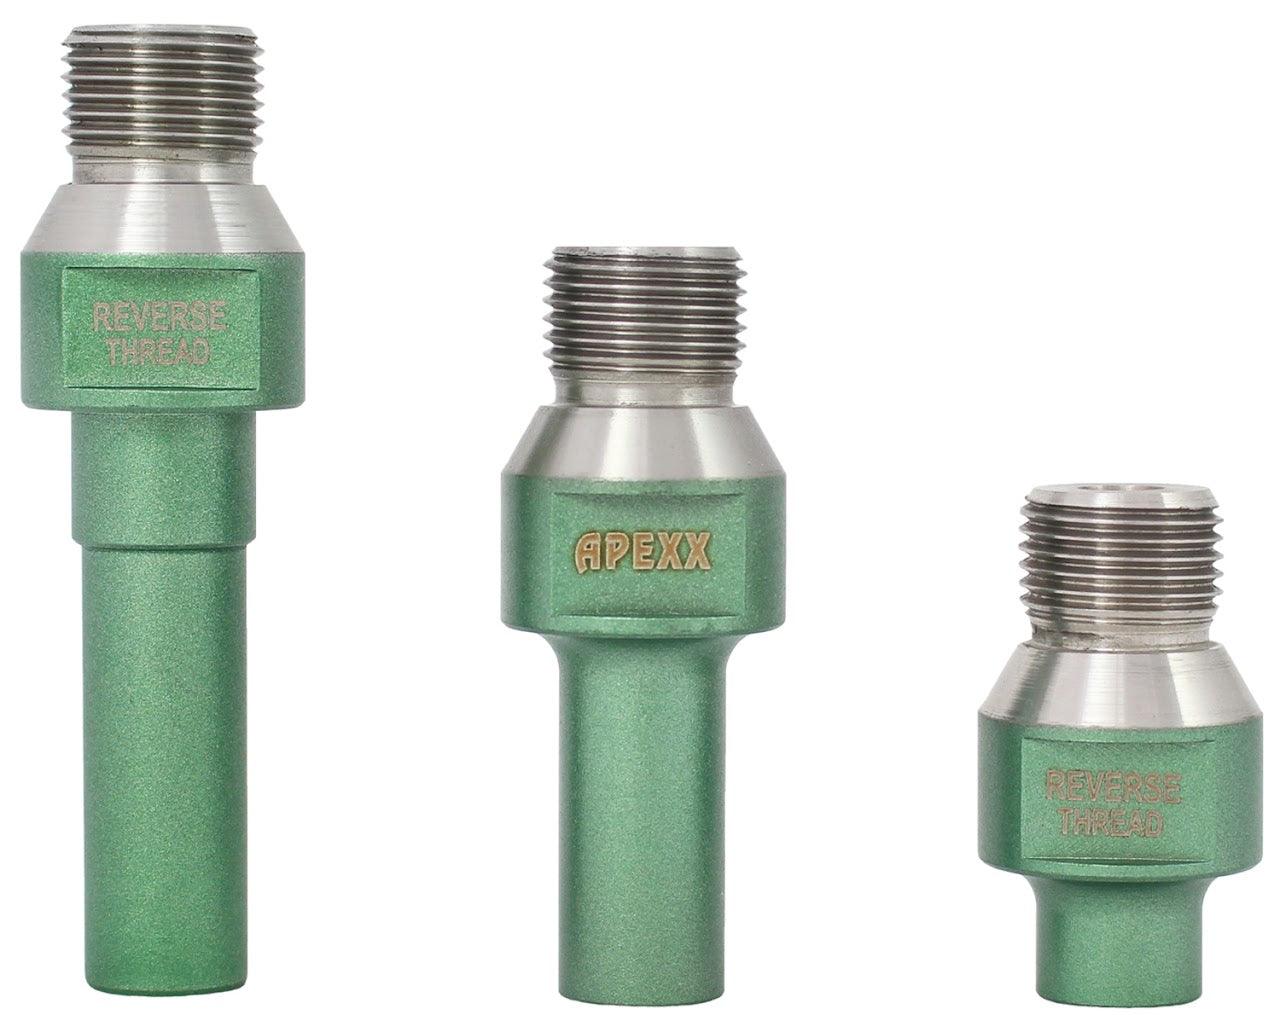 APEXX Reverse-Thread Adapters for Incremental Cutting Bit 2" - Direct Stone Tool Supply, Inc